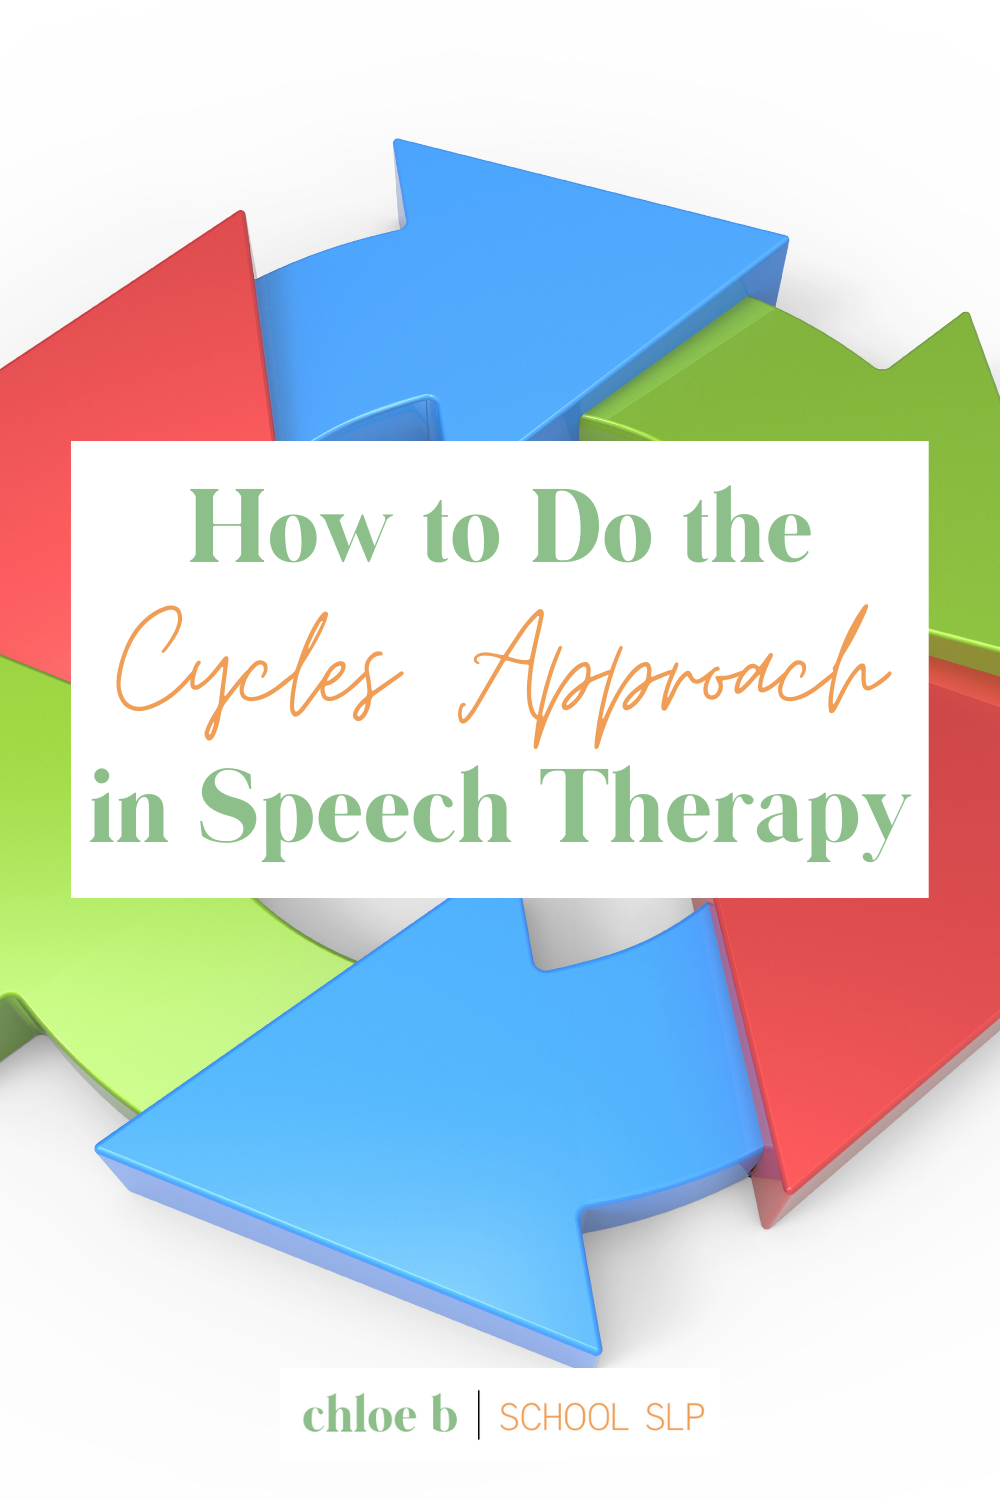 how to do cycles approach speech therapy